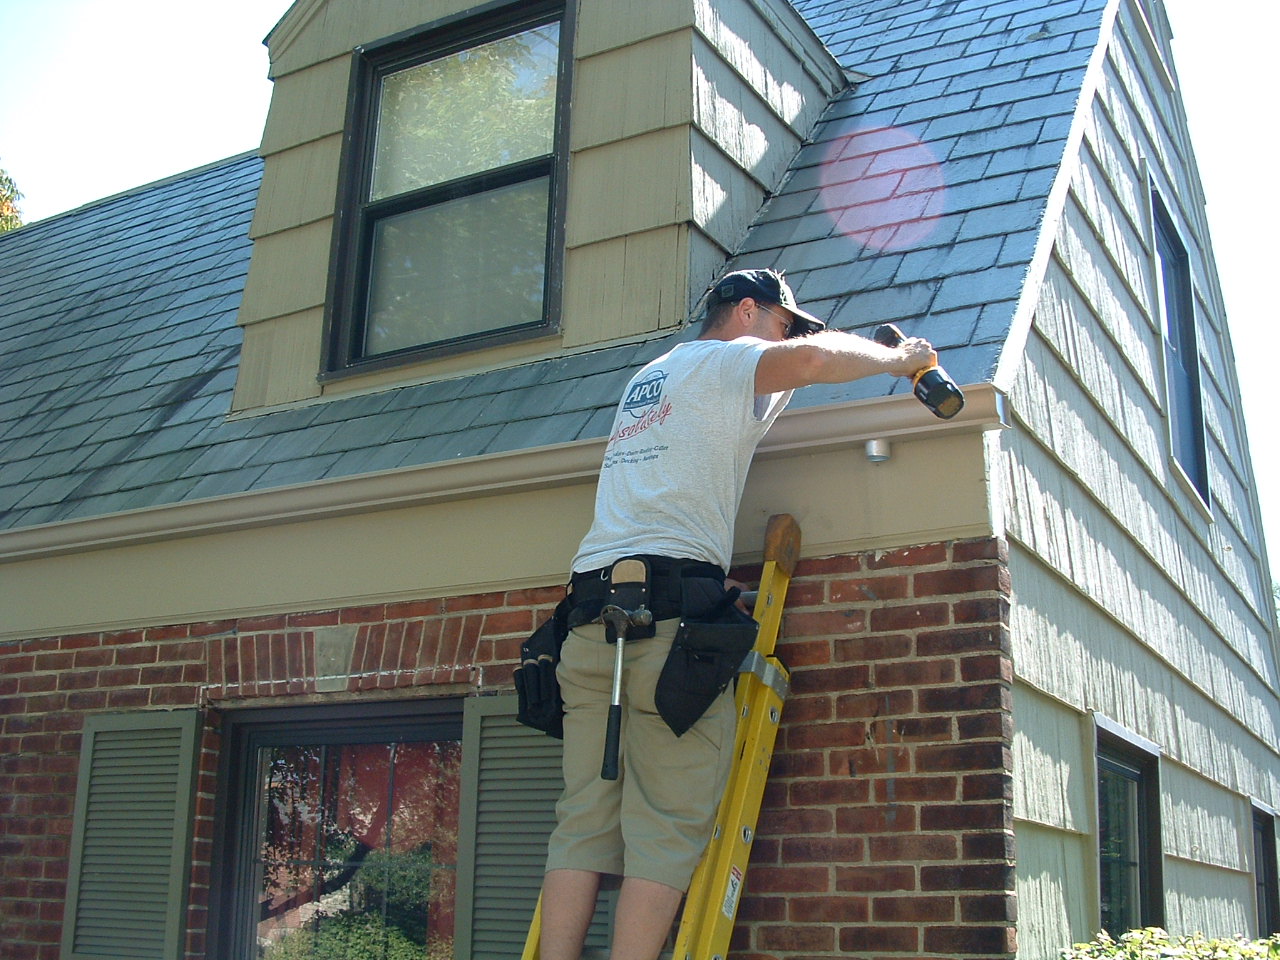 gutter repair and gutter replacement in columbus, ohio